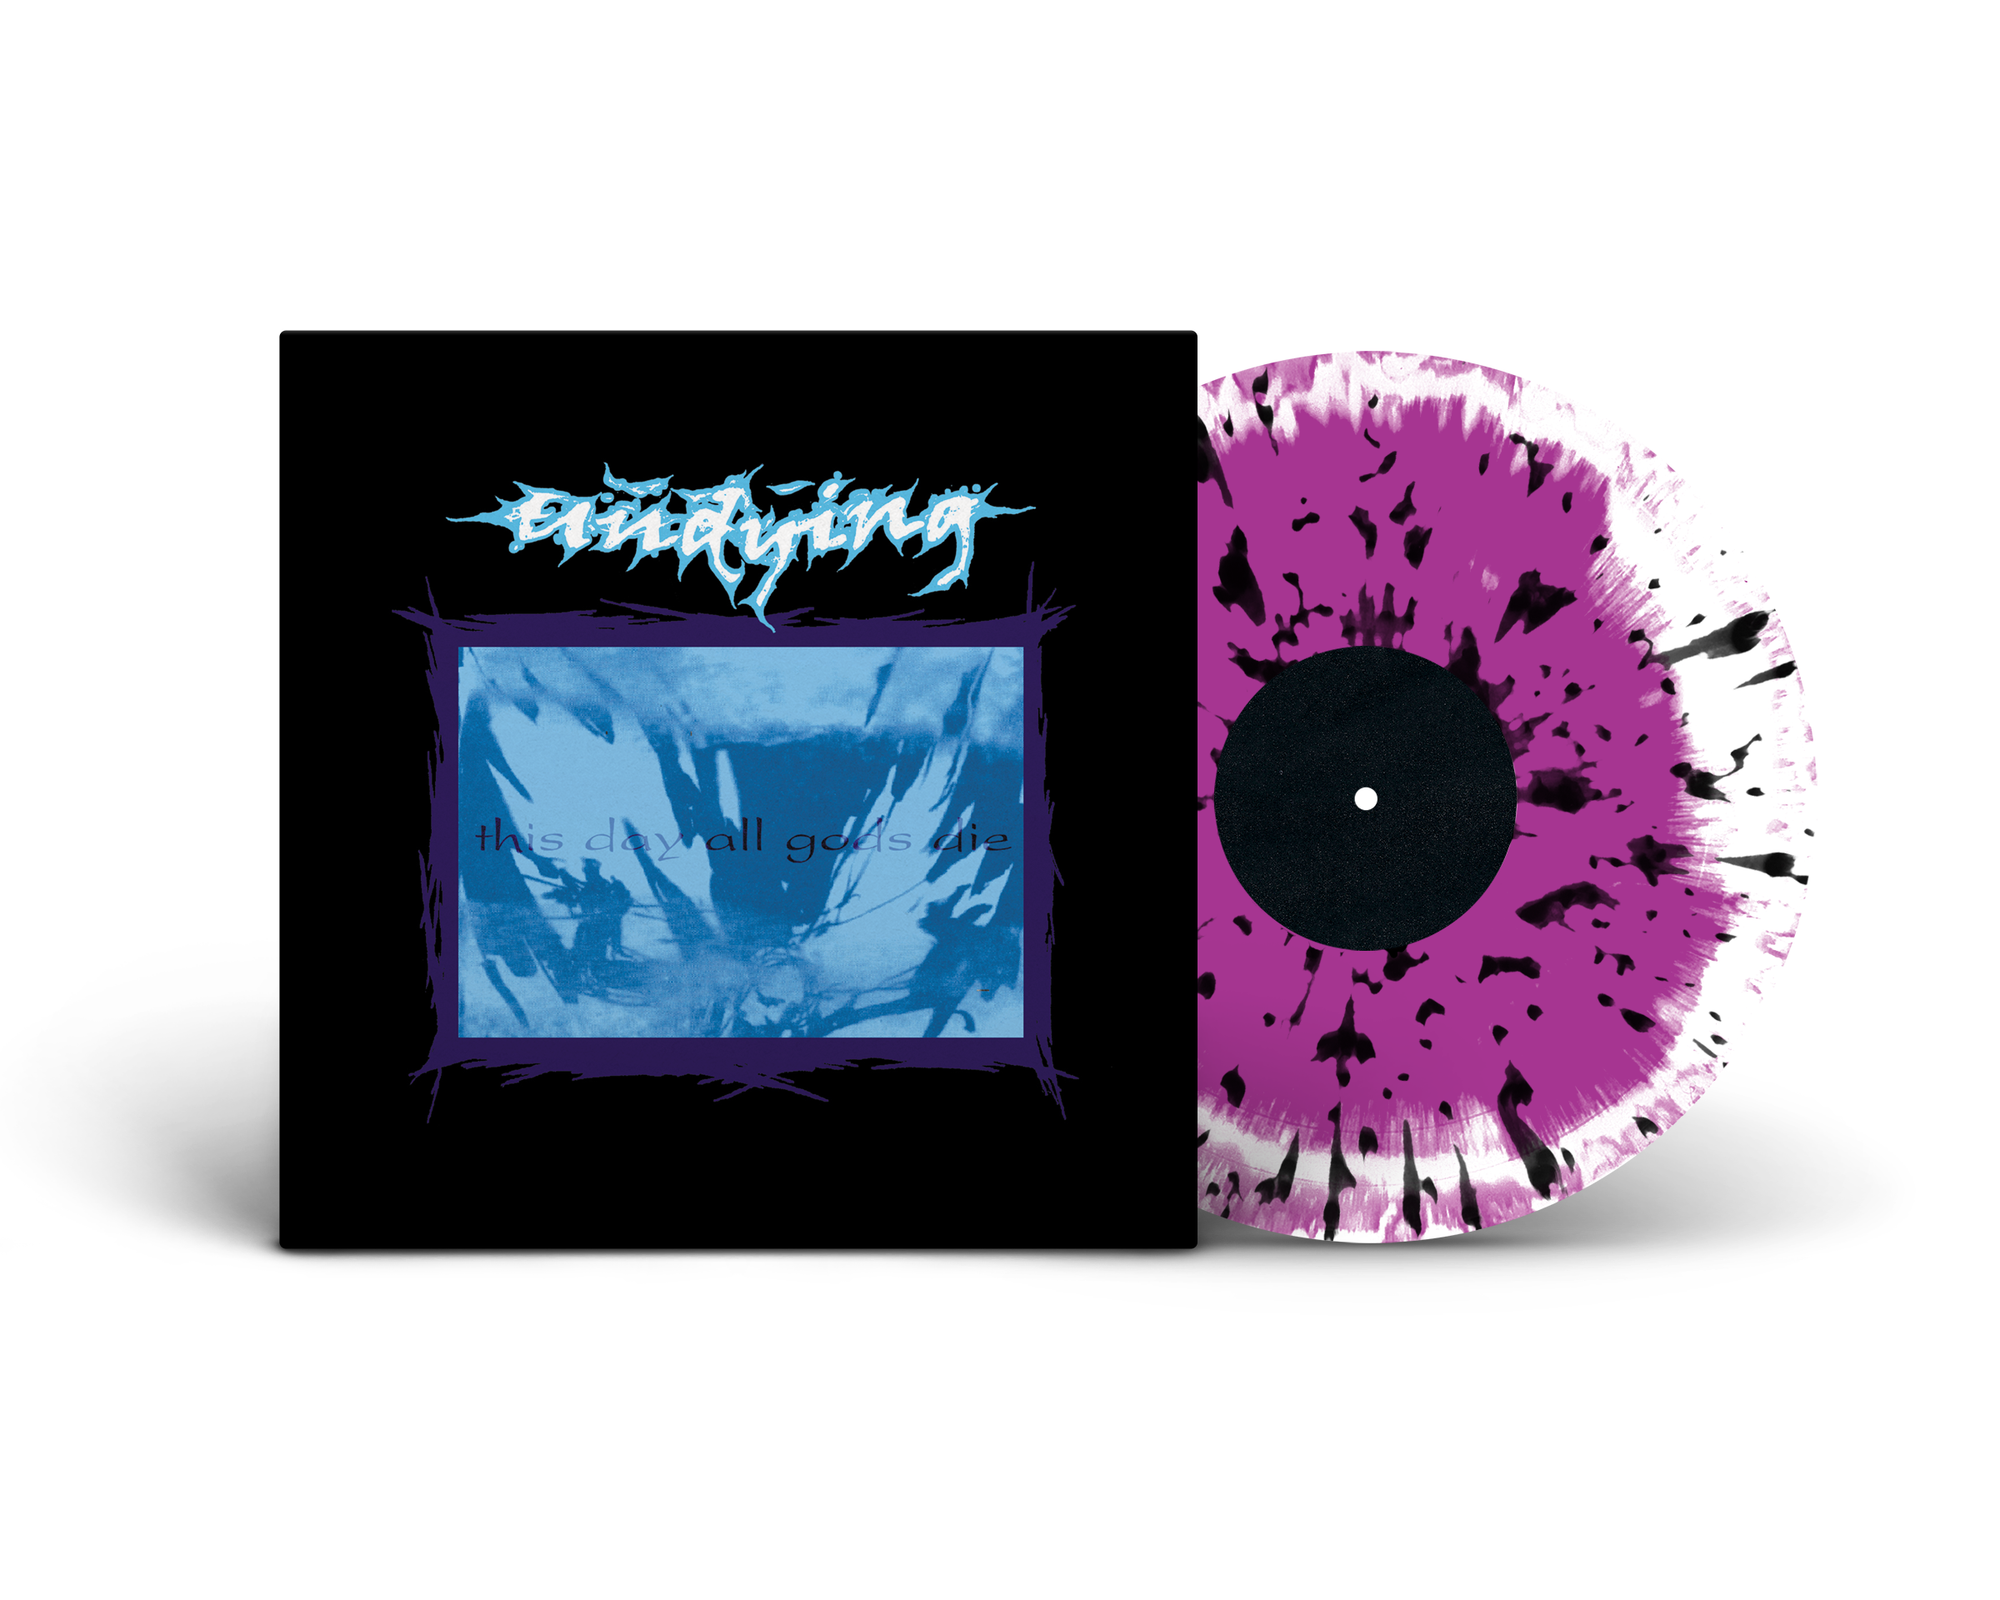 UNDYING "THIS DAY ALL GODS DIE" LP PREORDER